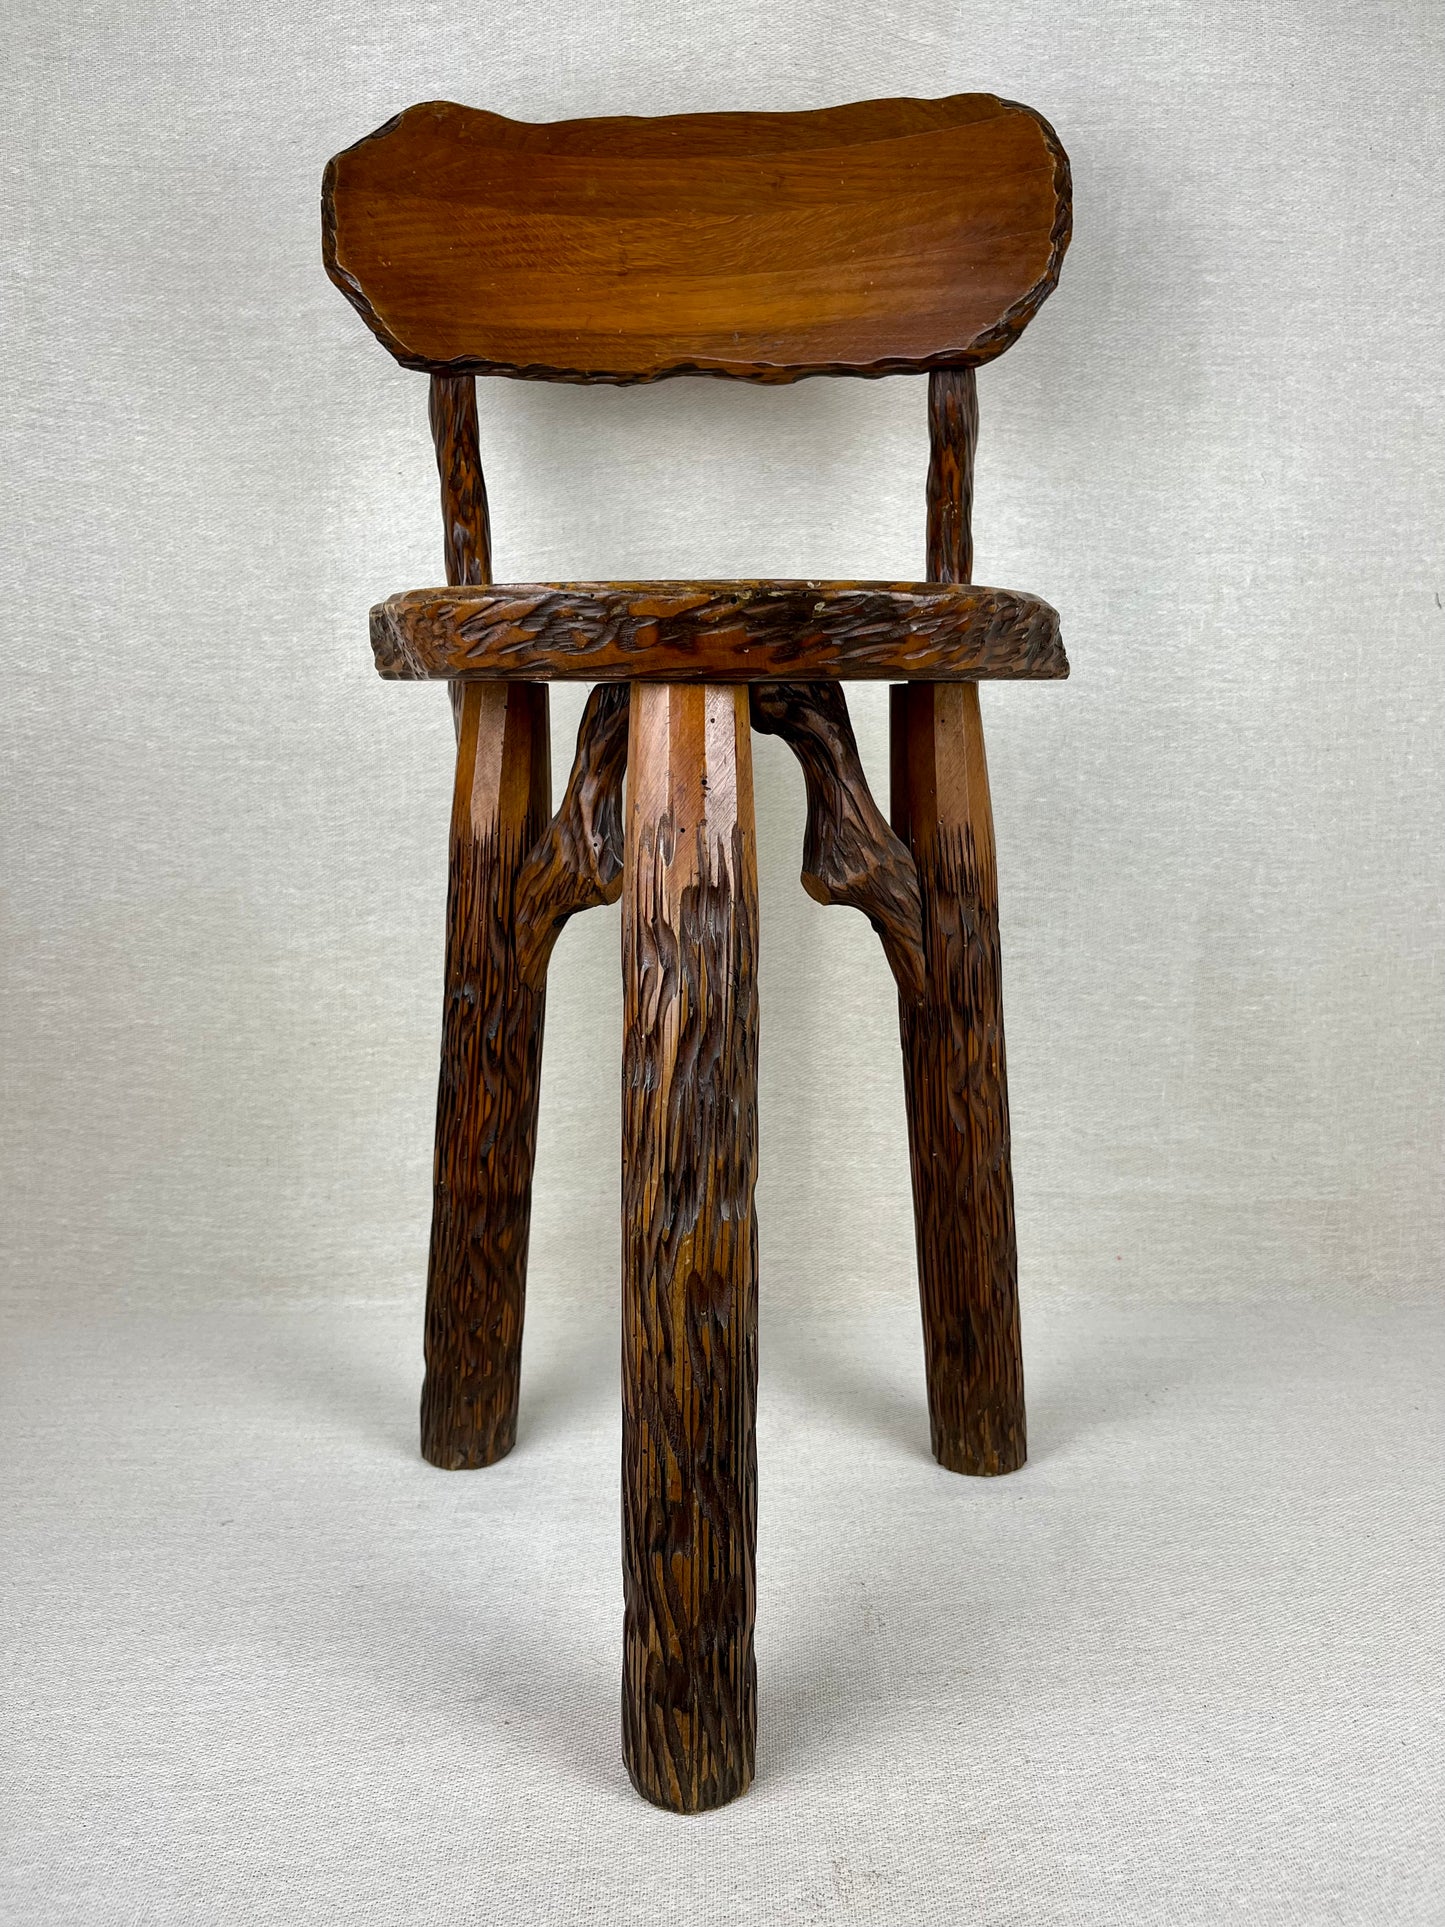 BRUTALIST FRENCH WOODEN CHAIR